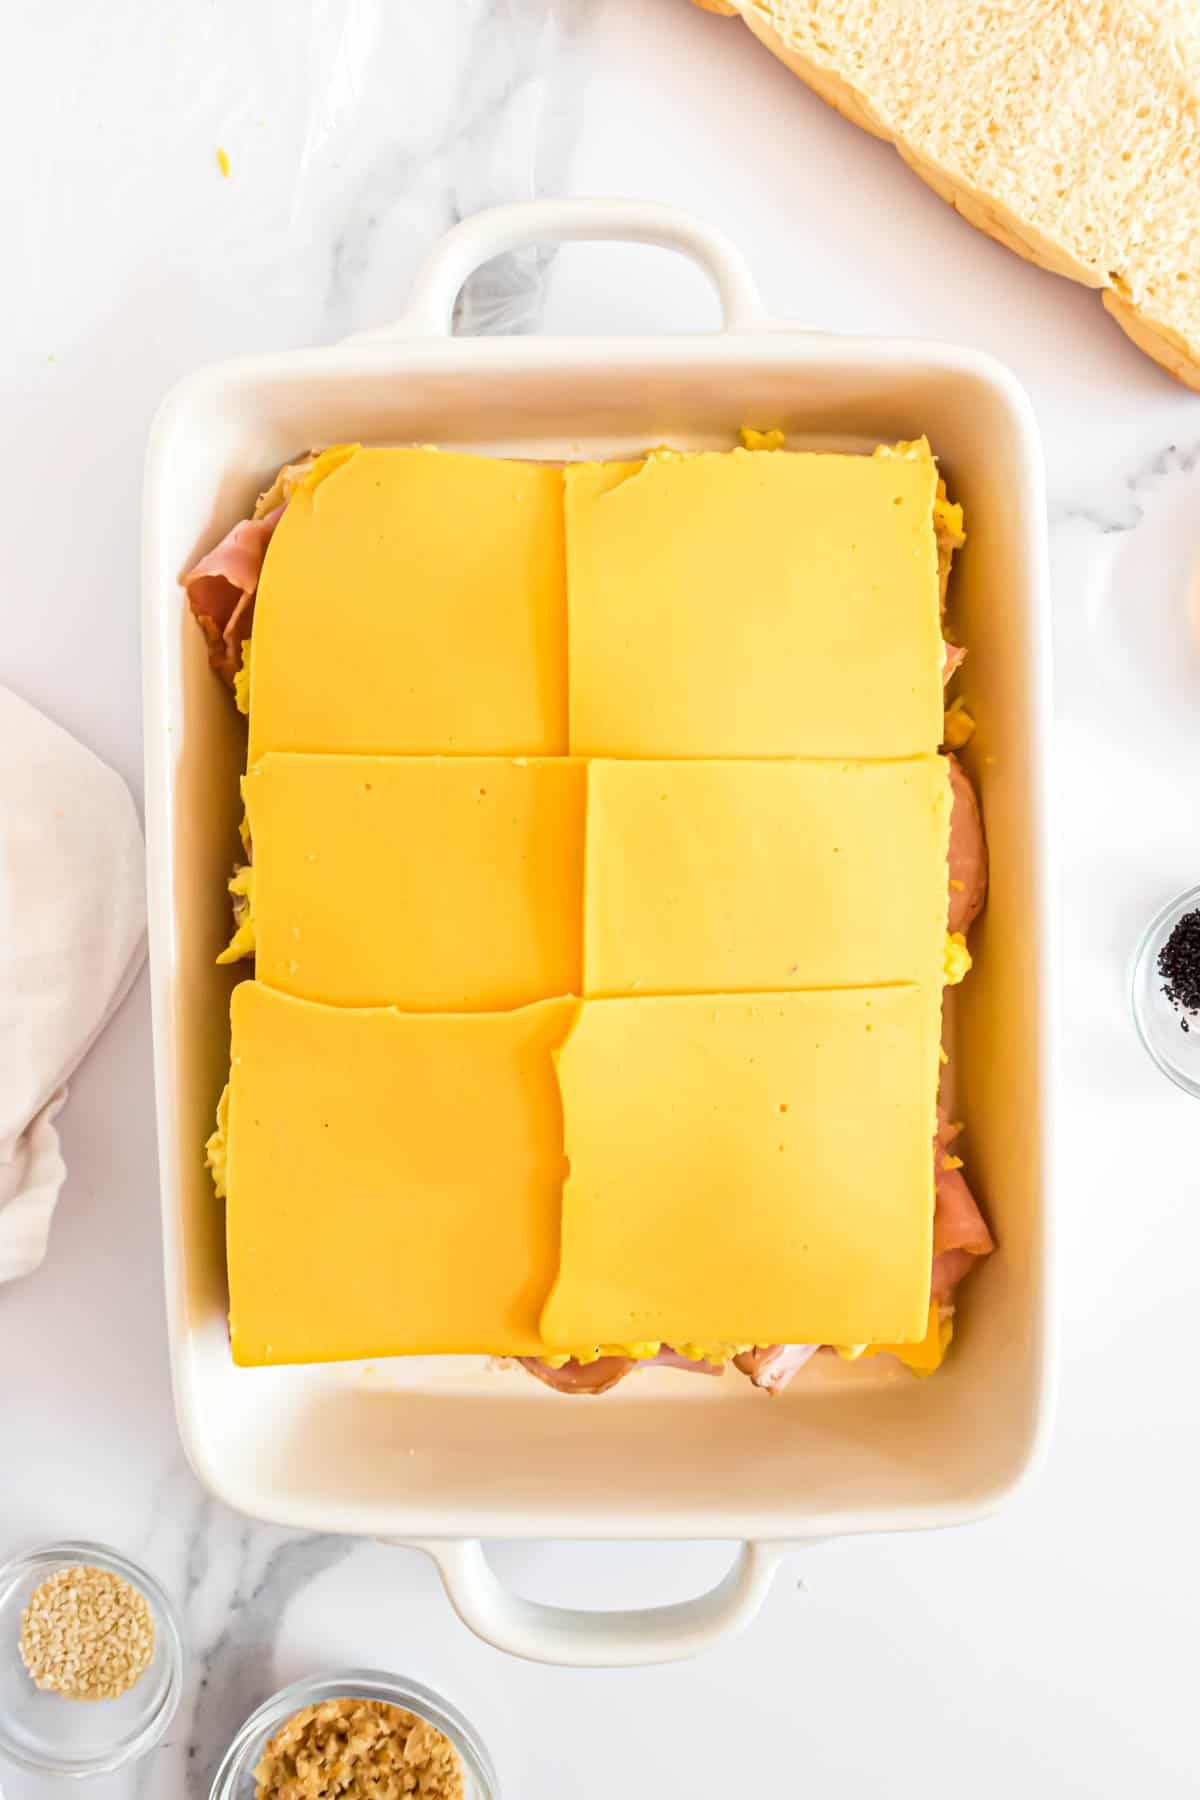 Adding more sliced cheese on top of breakfast sliders.